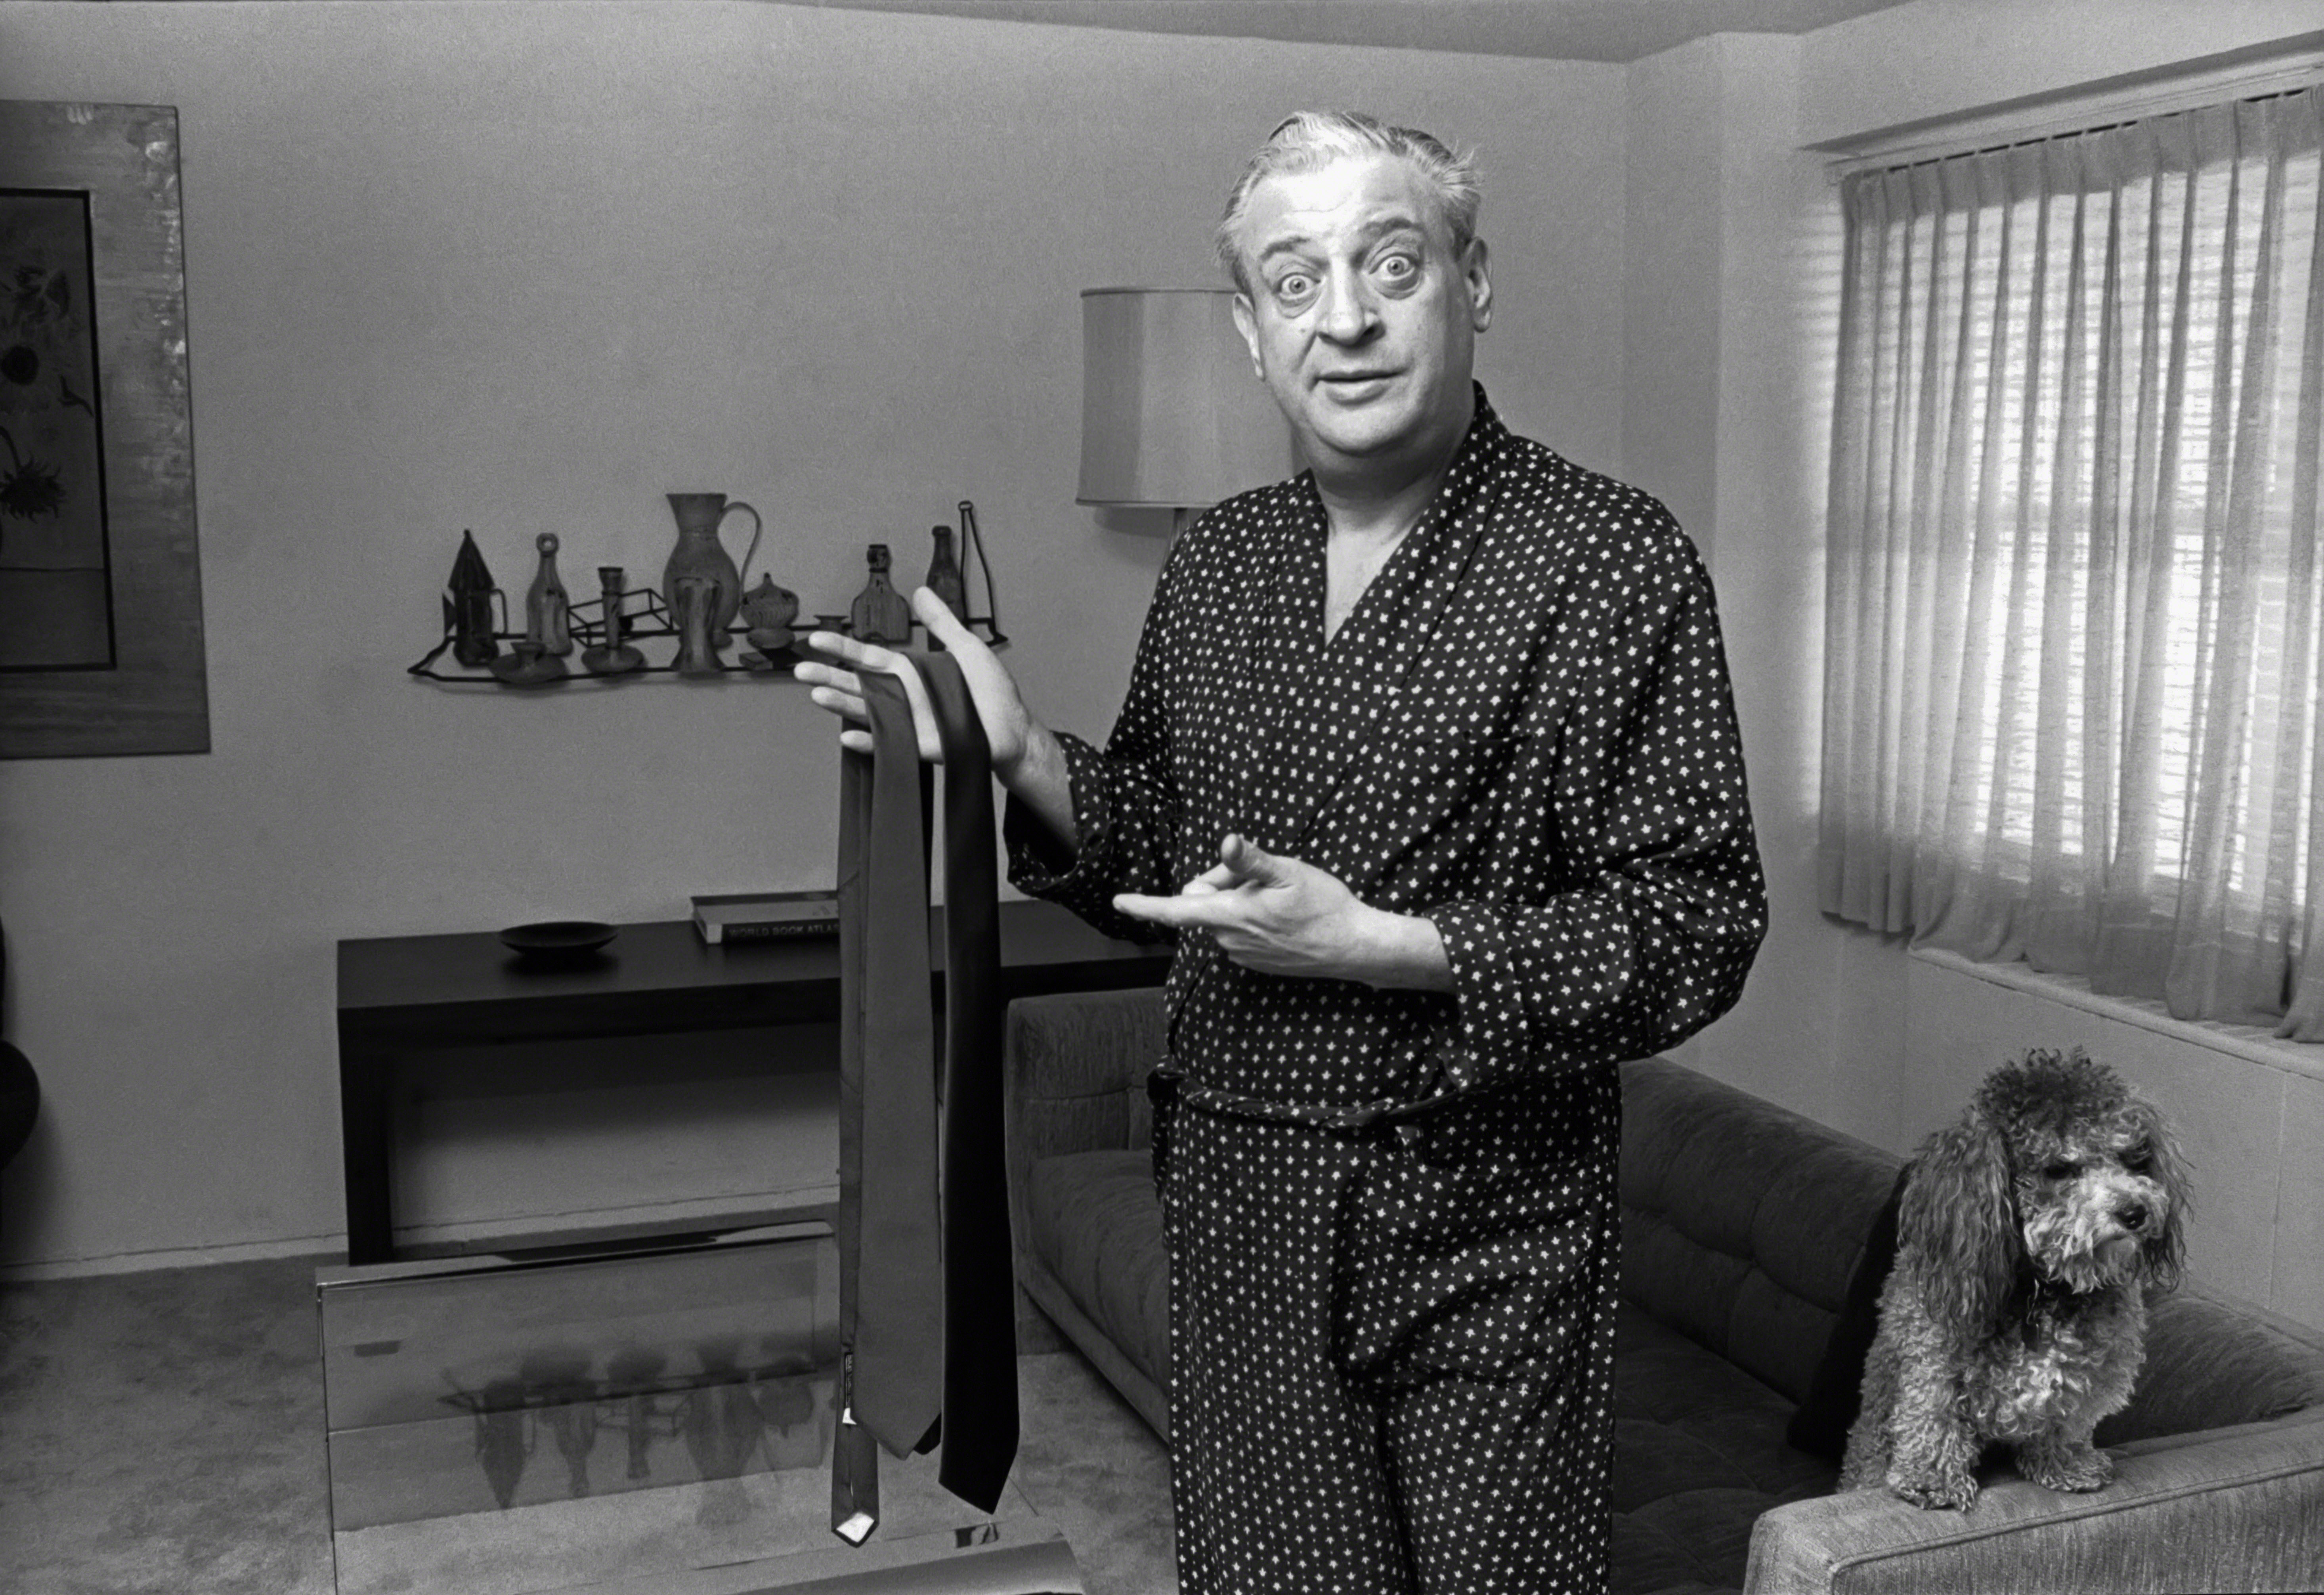 Rodney Dangerfield in his apartment circa 1978 in New York City. (Allan Tannenbaum/IMAGES/Getty Images)